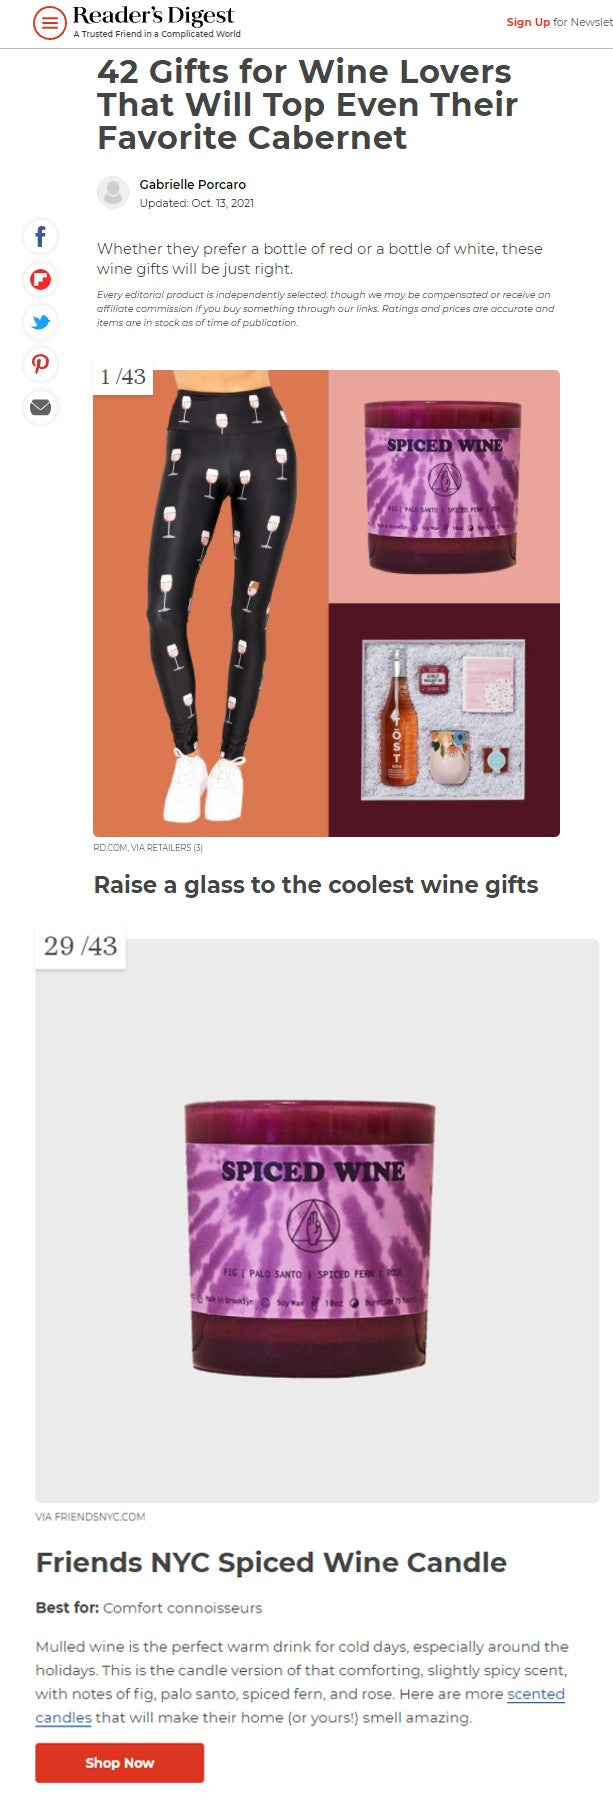 wine lover's gift guide spiced wine candle friends nyc